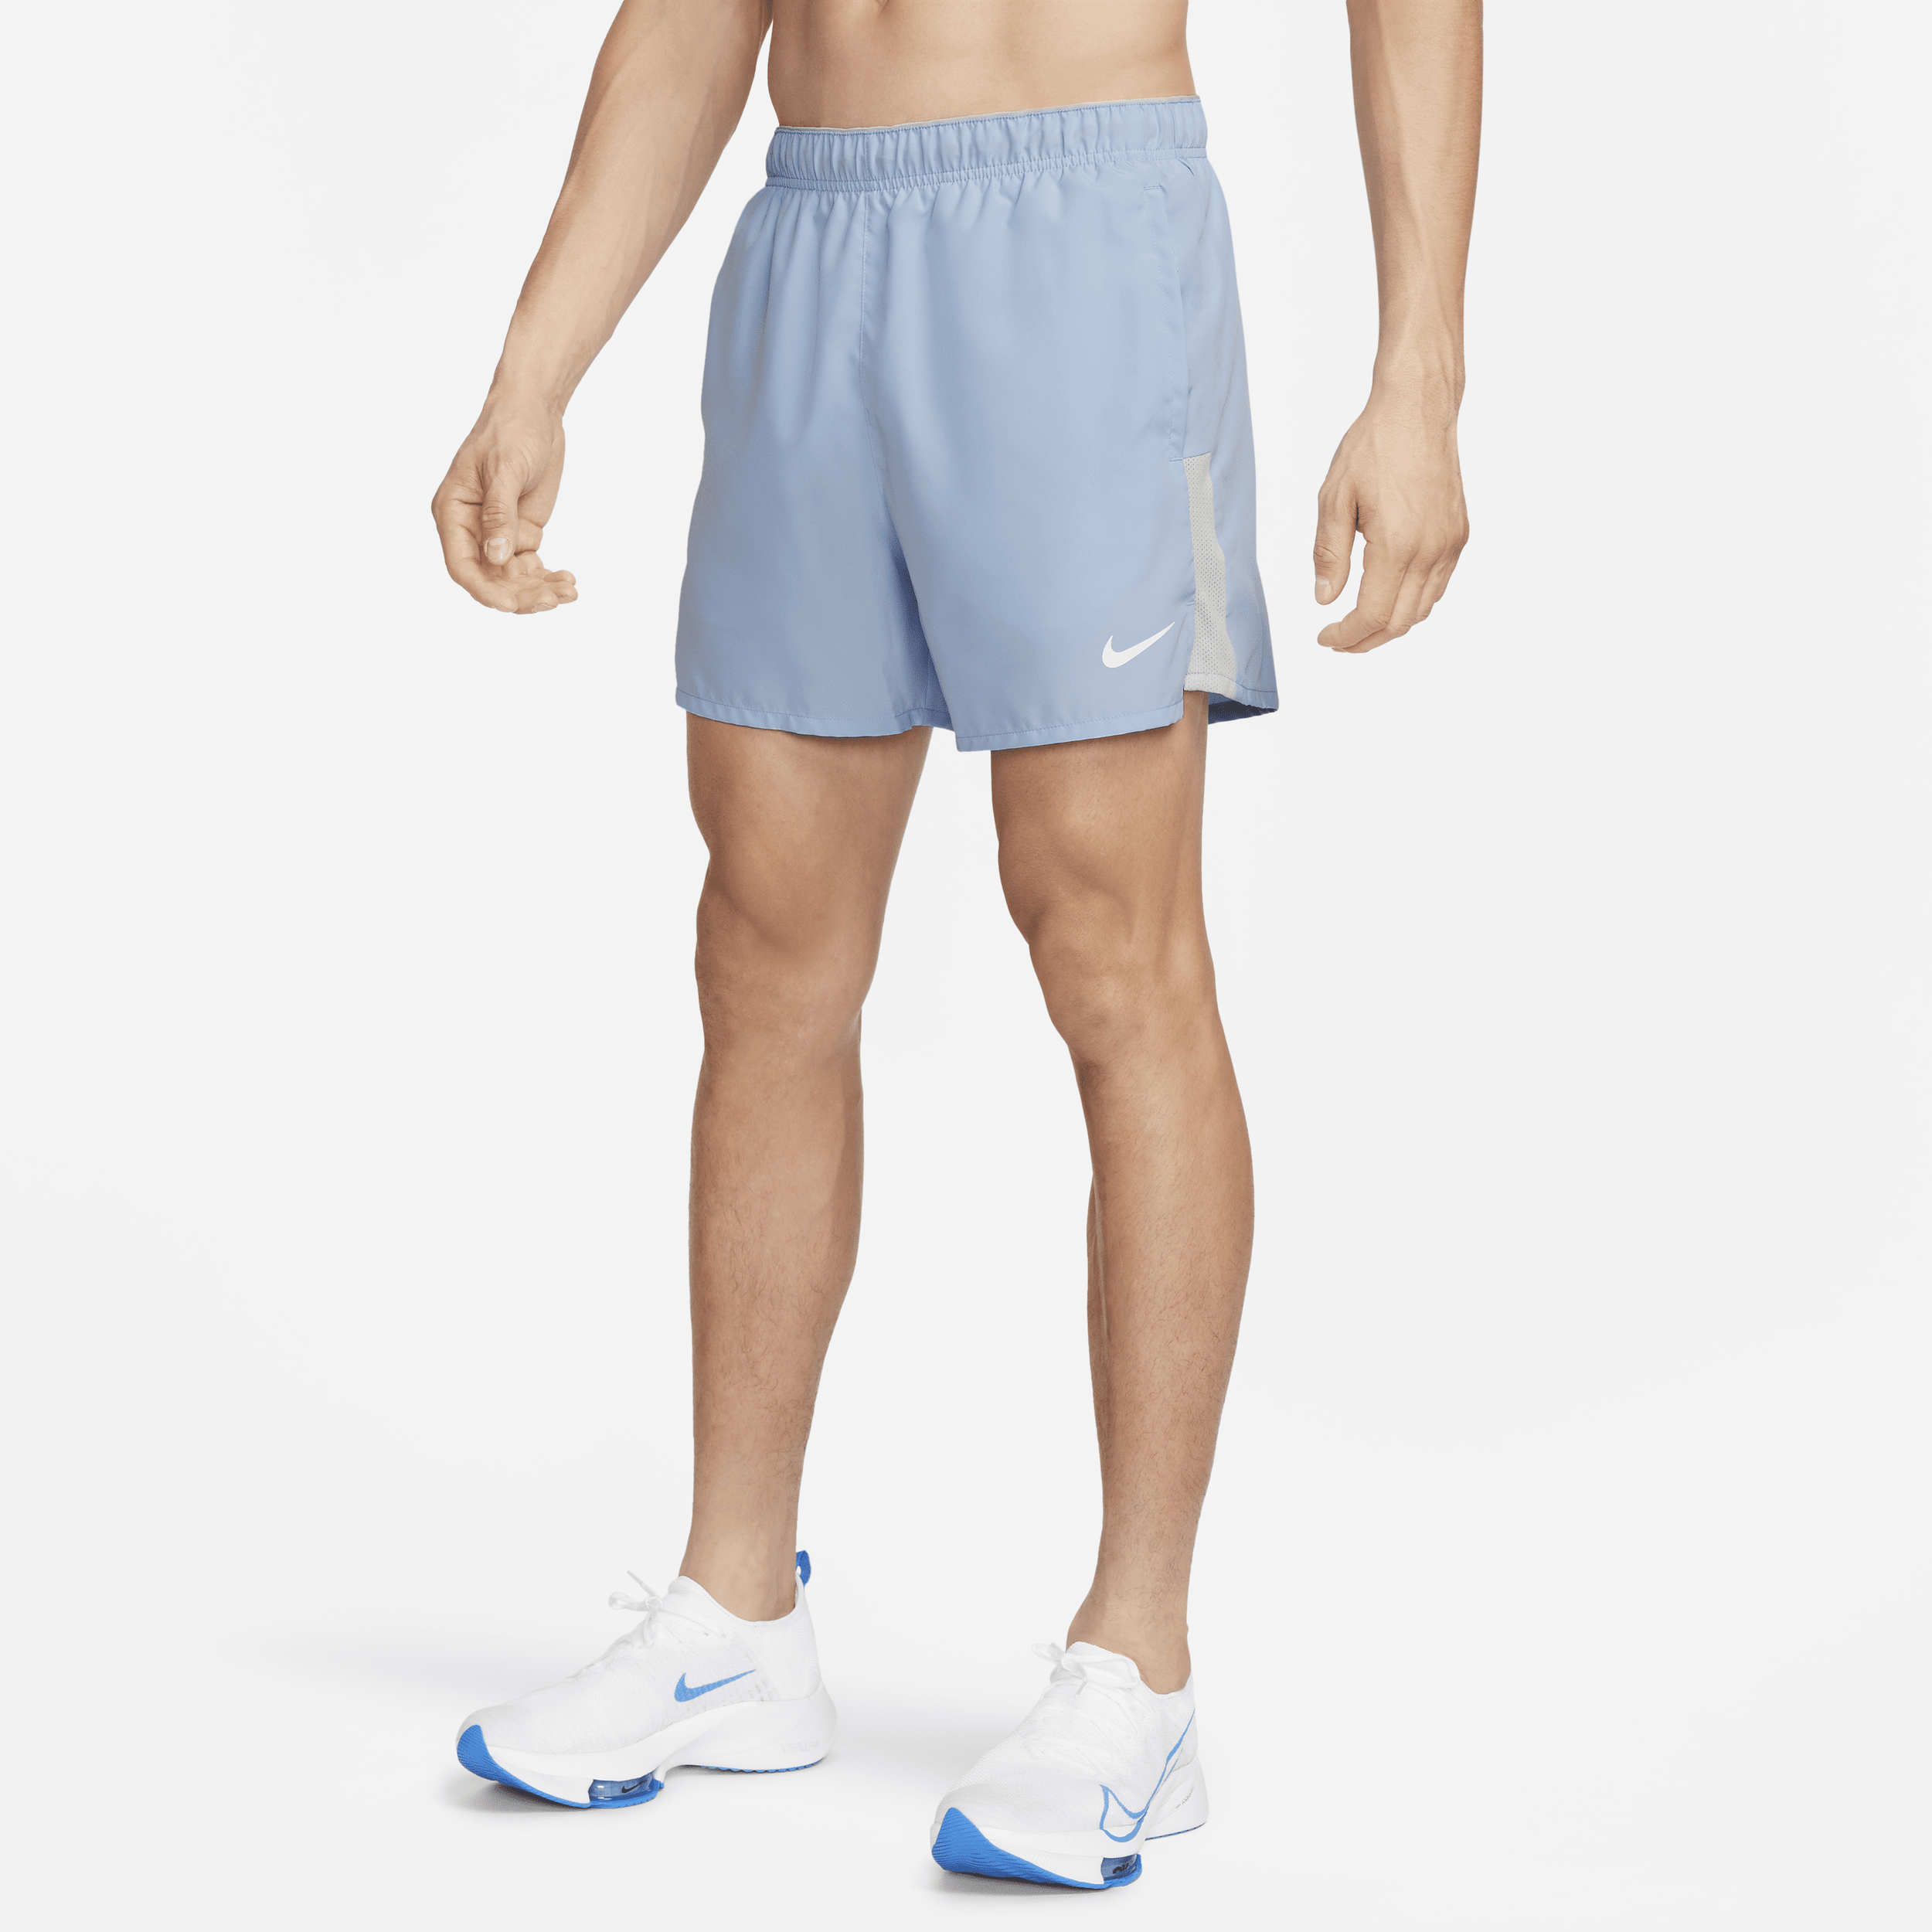 NIKE MEN'S CHALLENGER DRI-FIT 5" BRIEF-LINED RUNNING SHORTS,1009803897